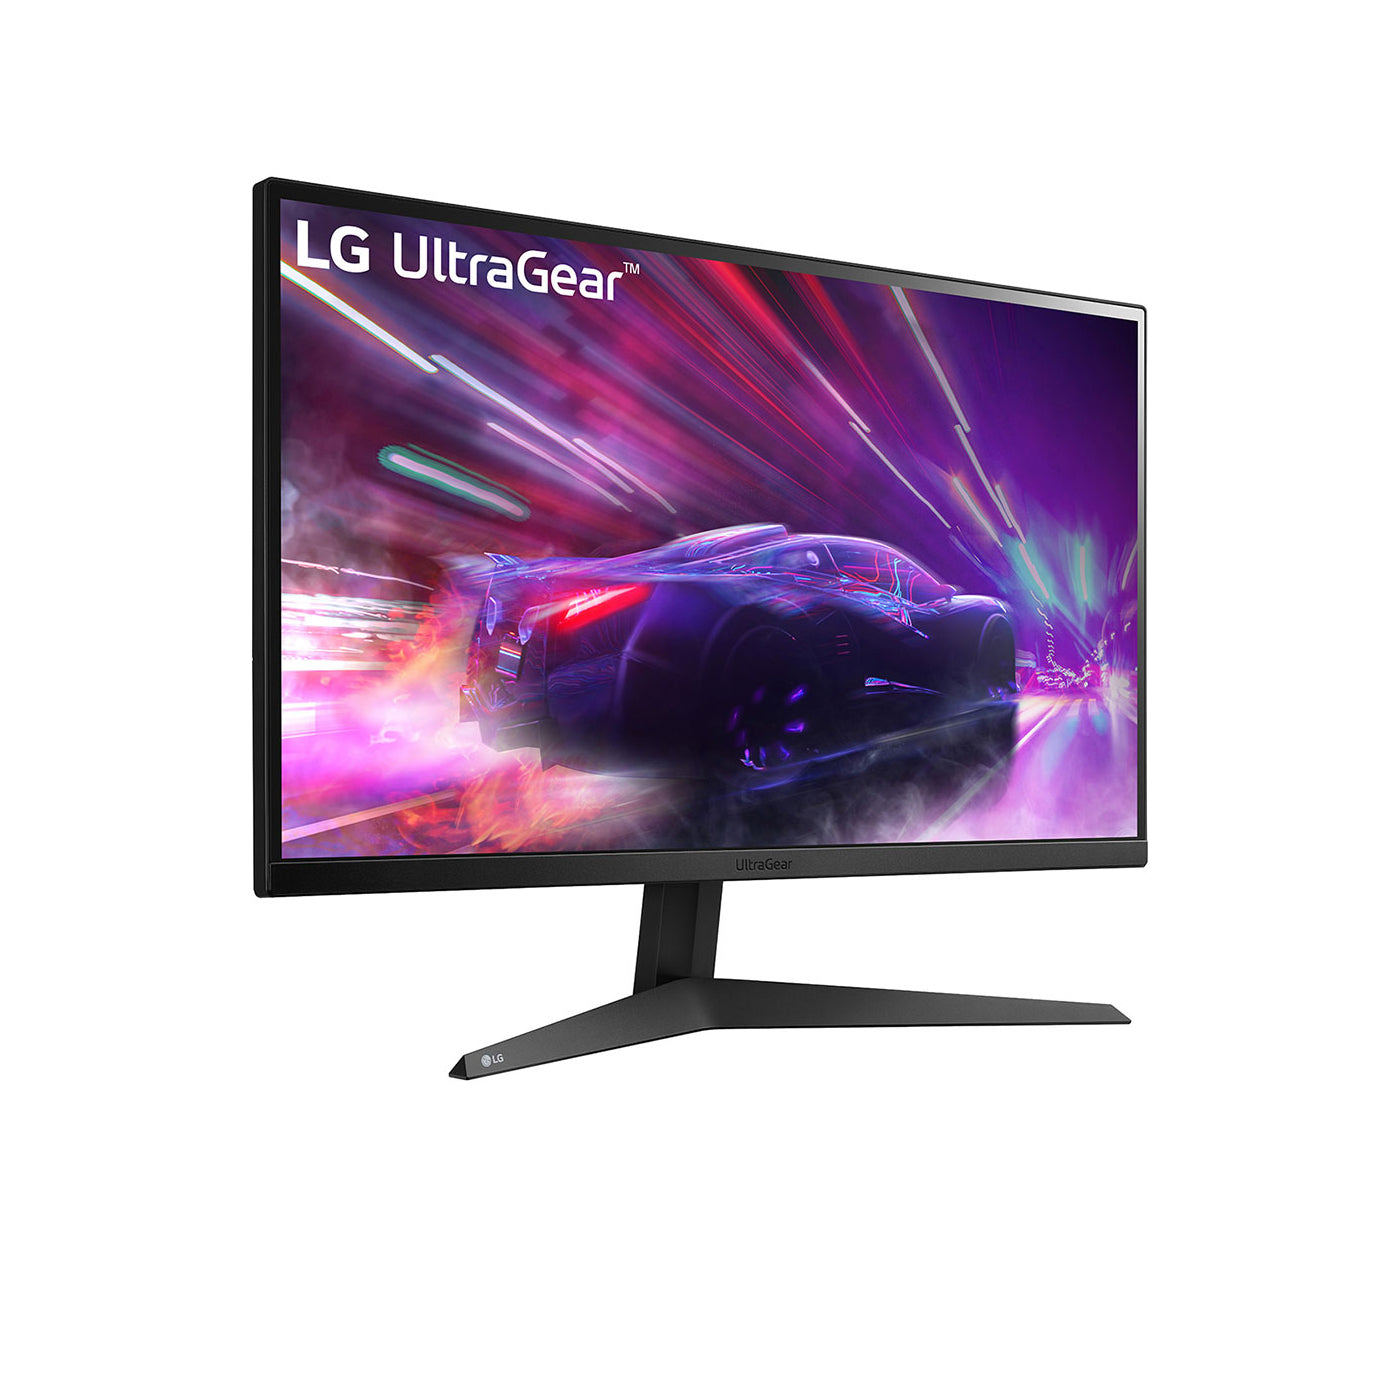 LG 27GQ50F-B UltraGear 27" Fhd 165hz 1ms Mbr Gaming Monitor (Brand New) Best computer monitor, gaming monitor, professional monitor, monitor for sale in Lebanon, monitor in Lebanon, laptops king Lebanon